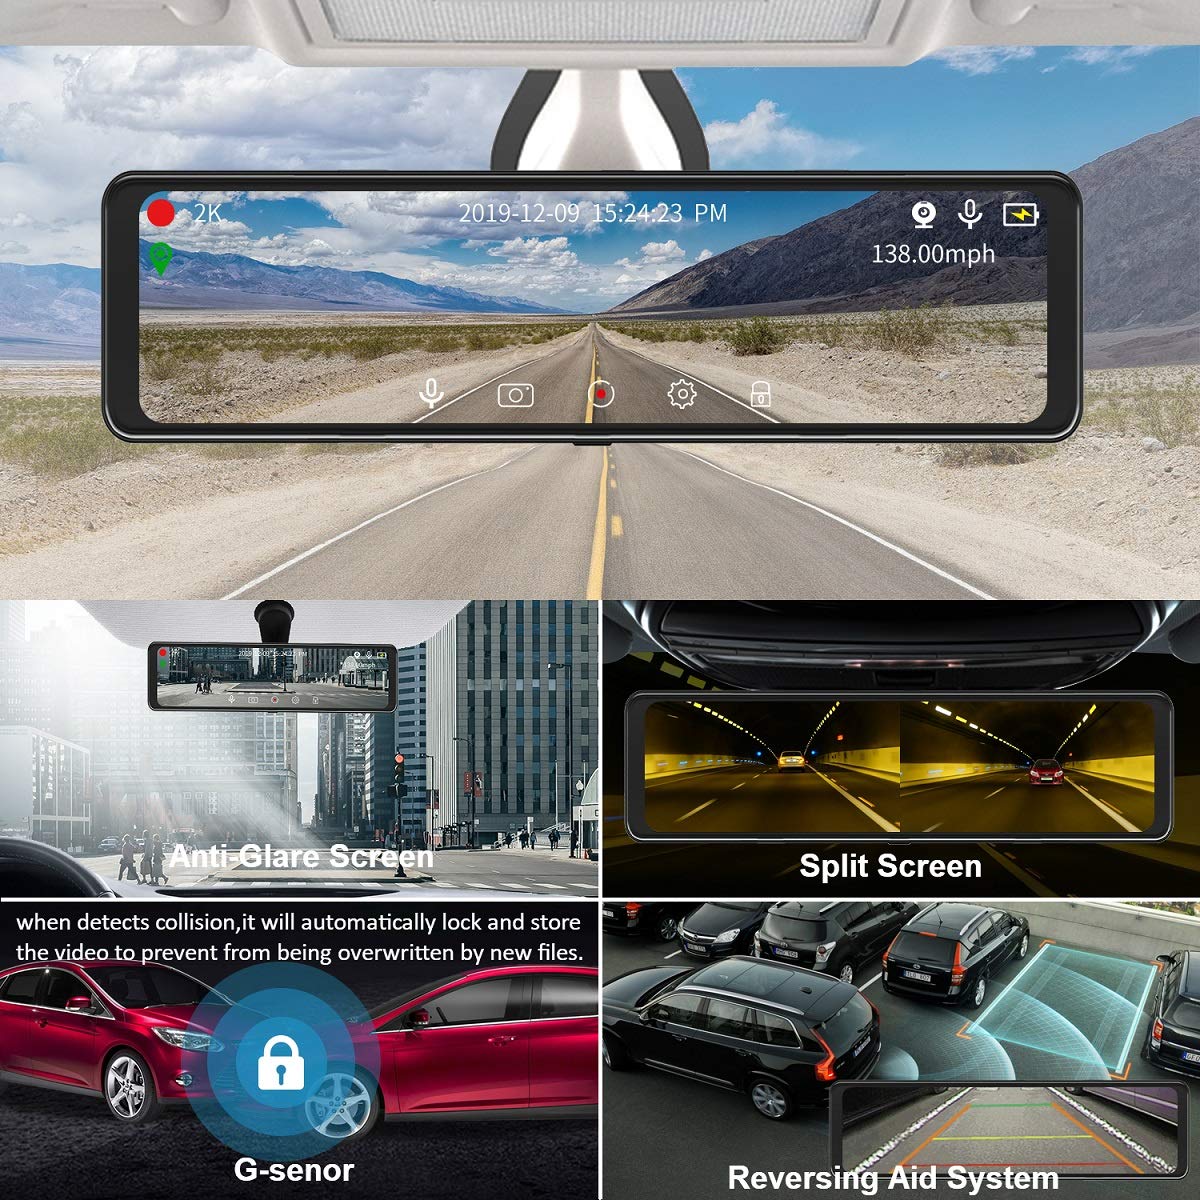 Mirror Dash Cam Car Backup Camera 12" 2K IPS Full Touch Screen 2560P+1080P Resolution Front and Rear View Dual Lens, Adjustable Wide Angle, WDR Night Vision, Parking Monitor, GPS & 32GB Card Included